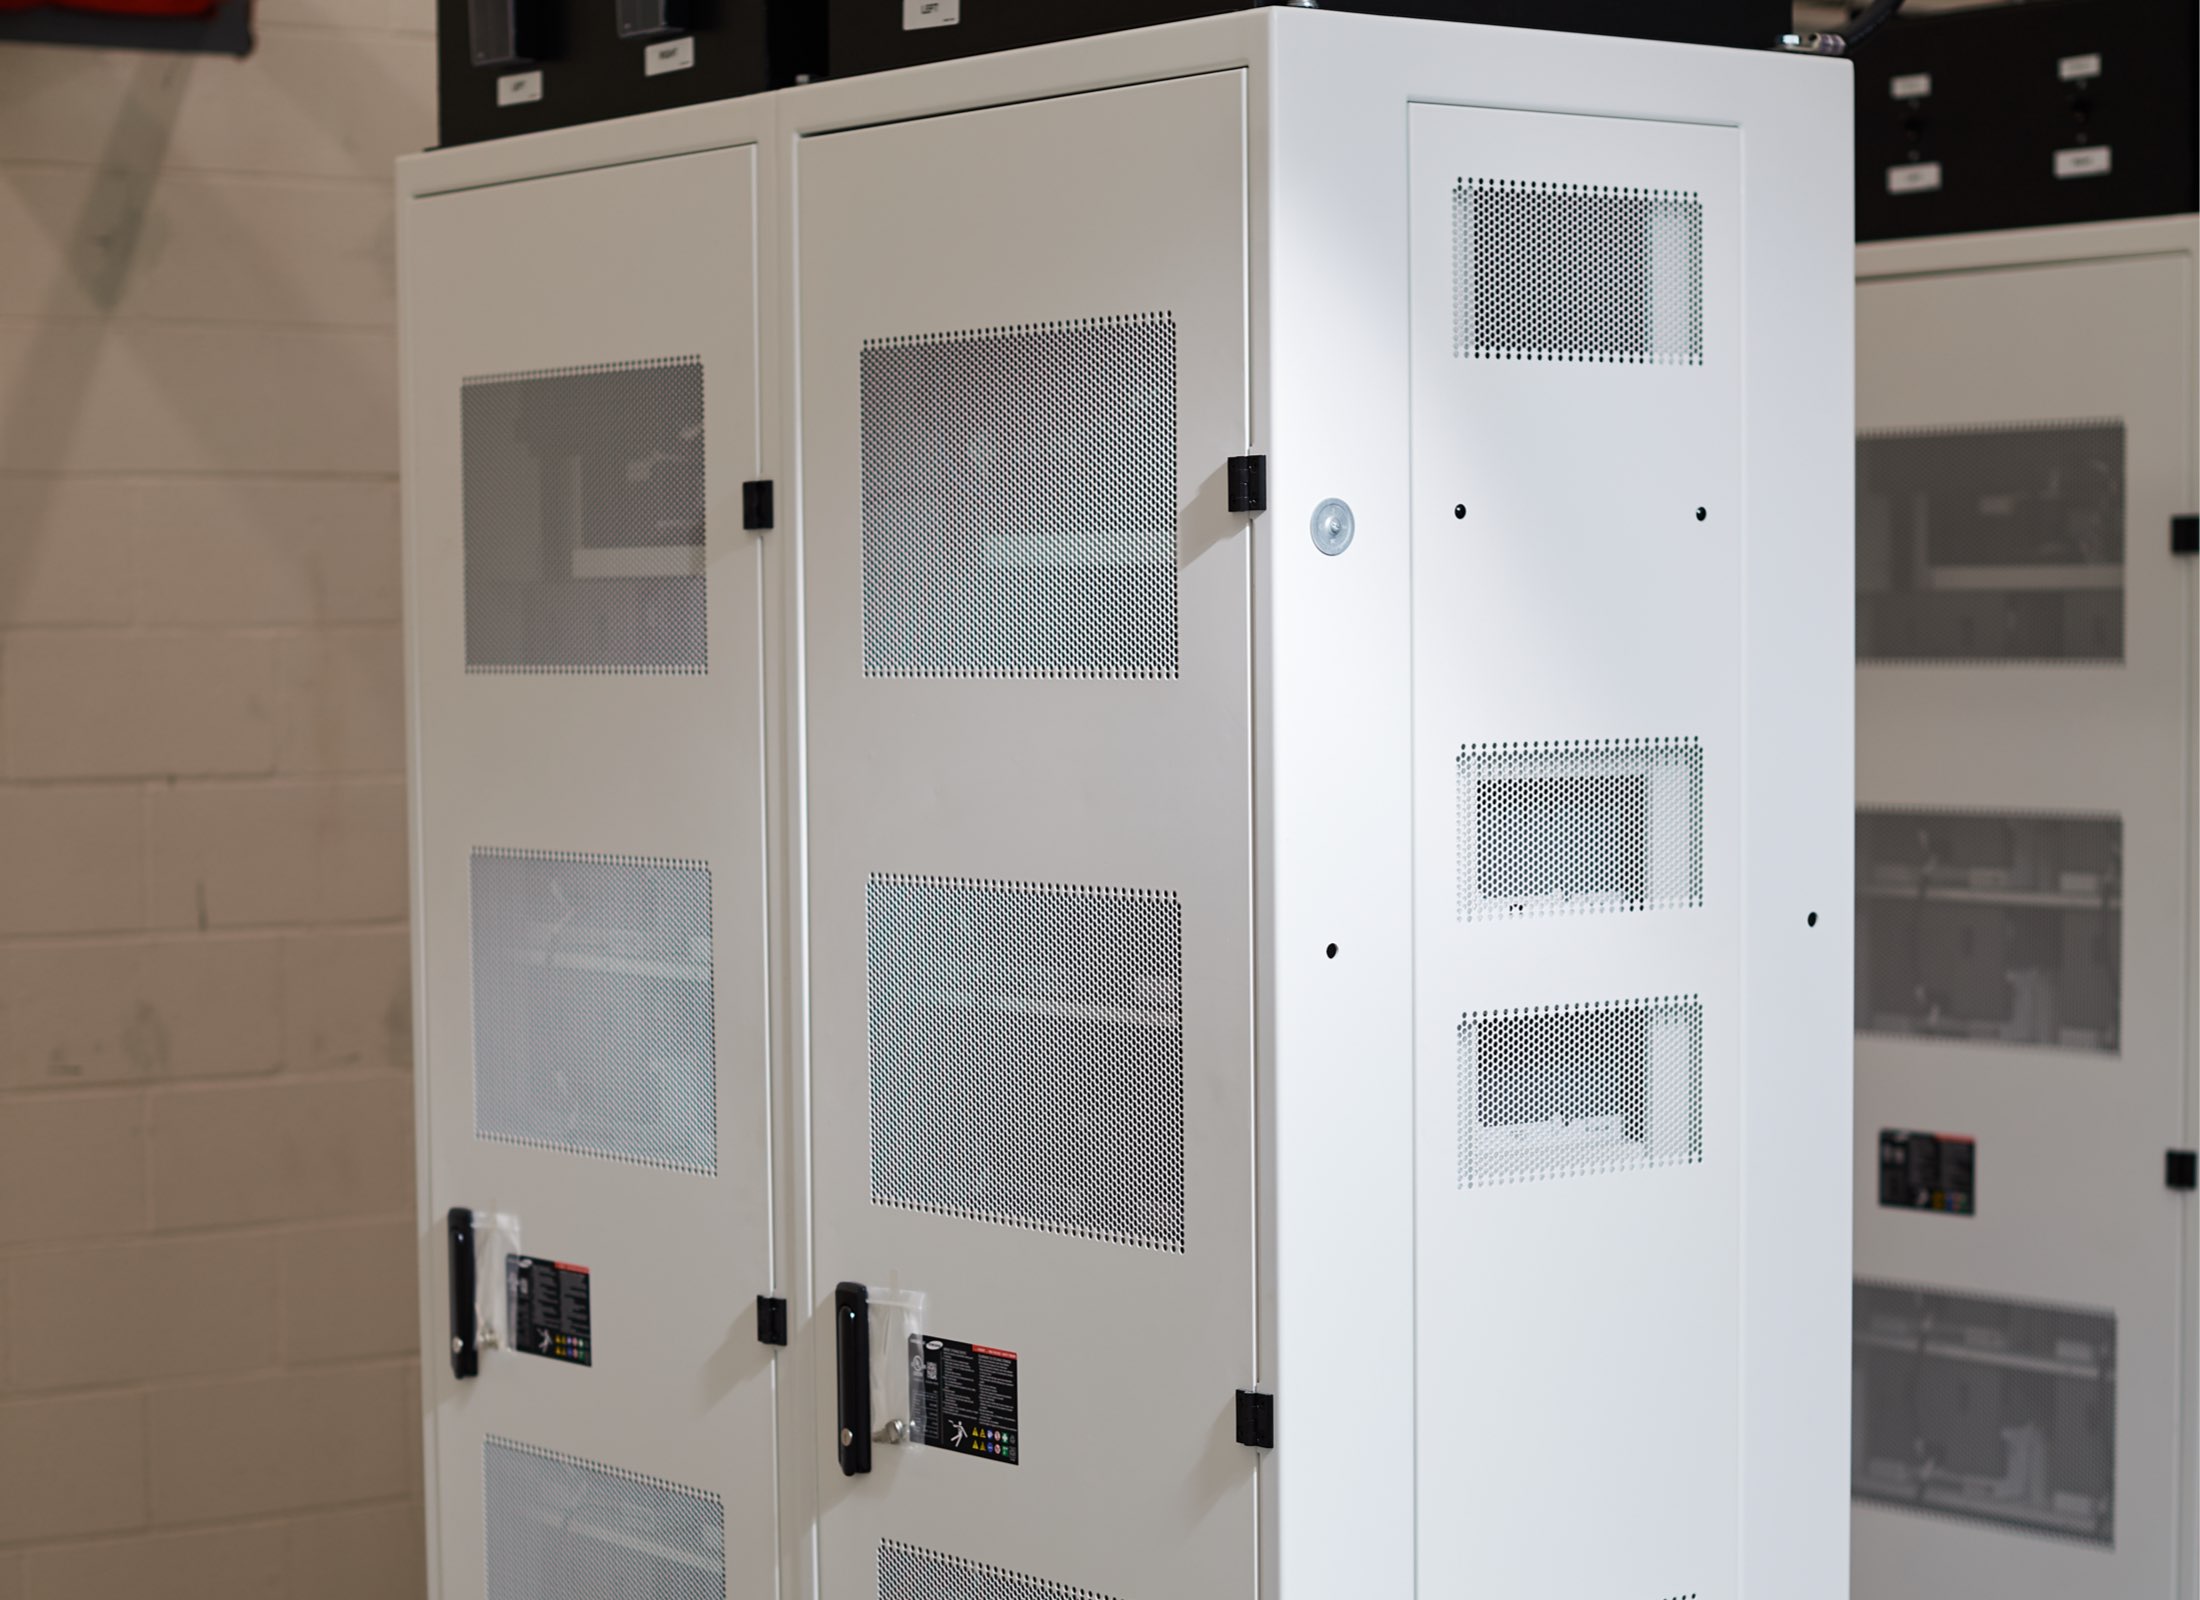 Power system cabinet and rack from Vertiv, one of Zonatherm's partners in providing reliable power